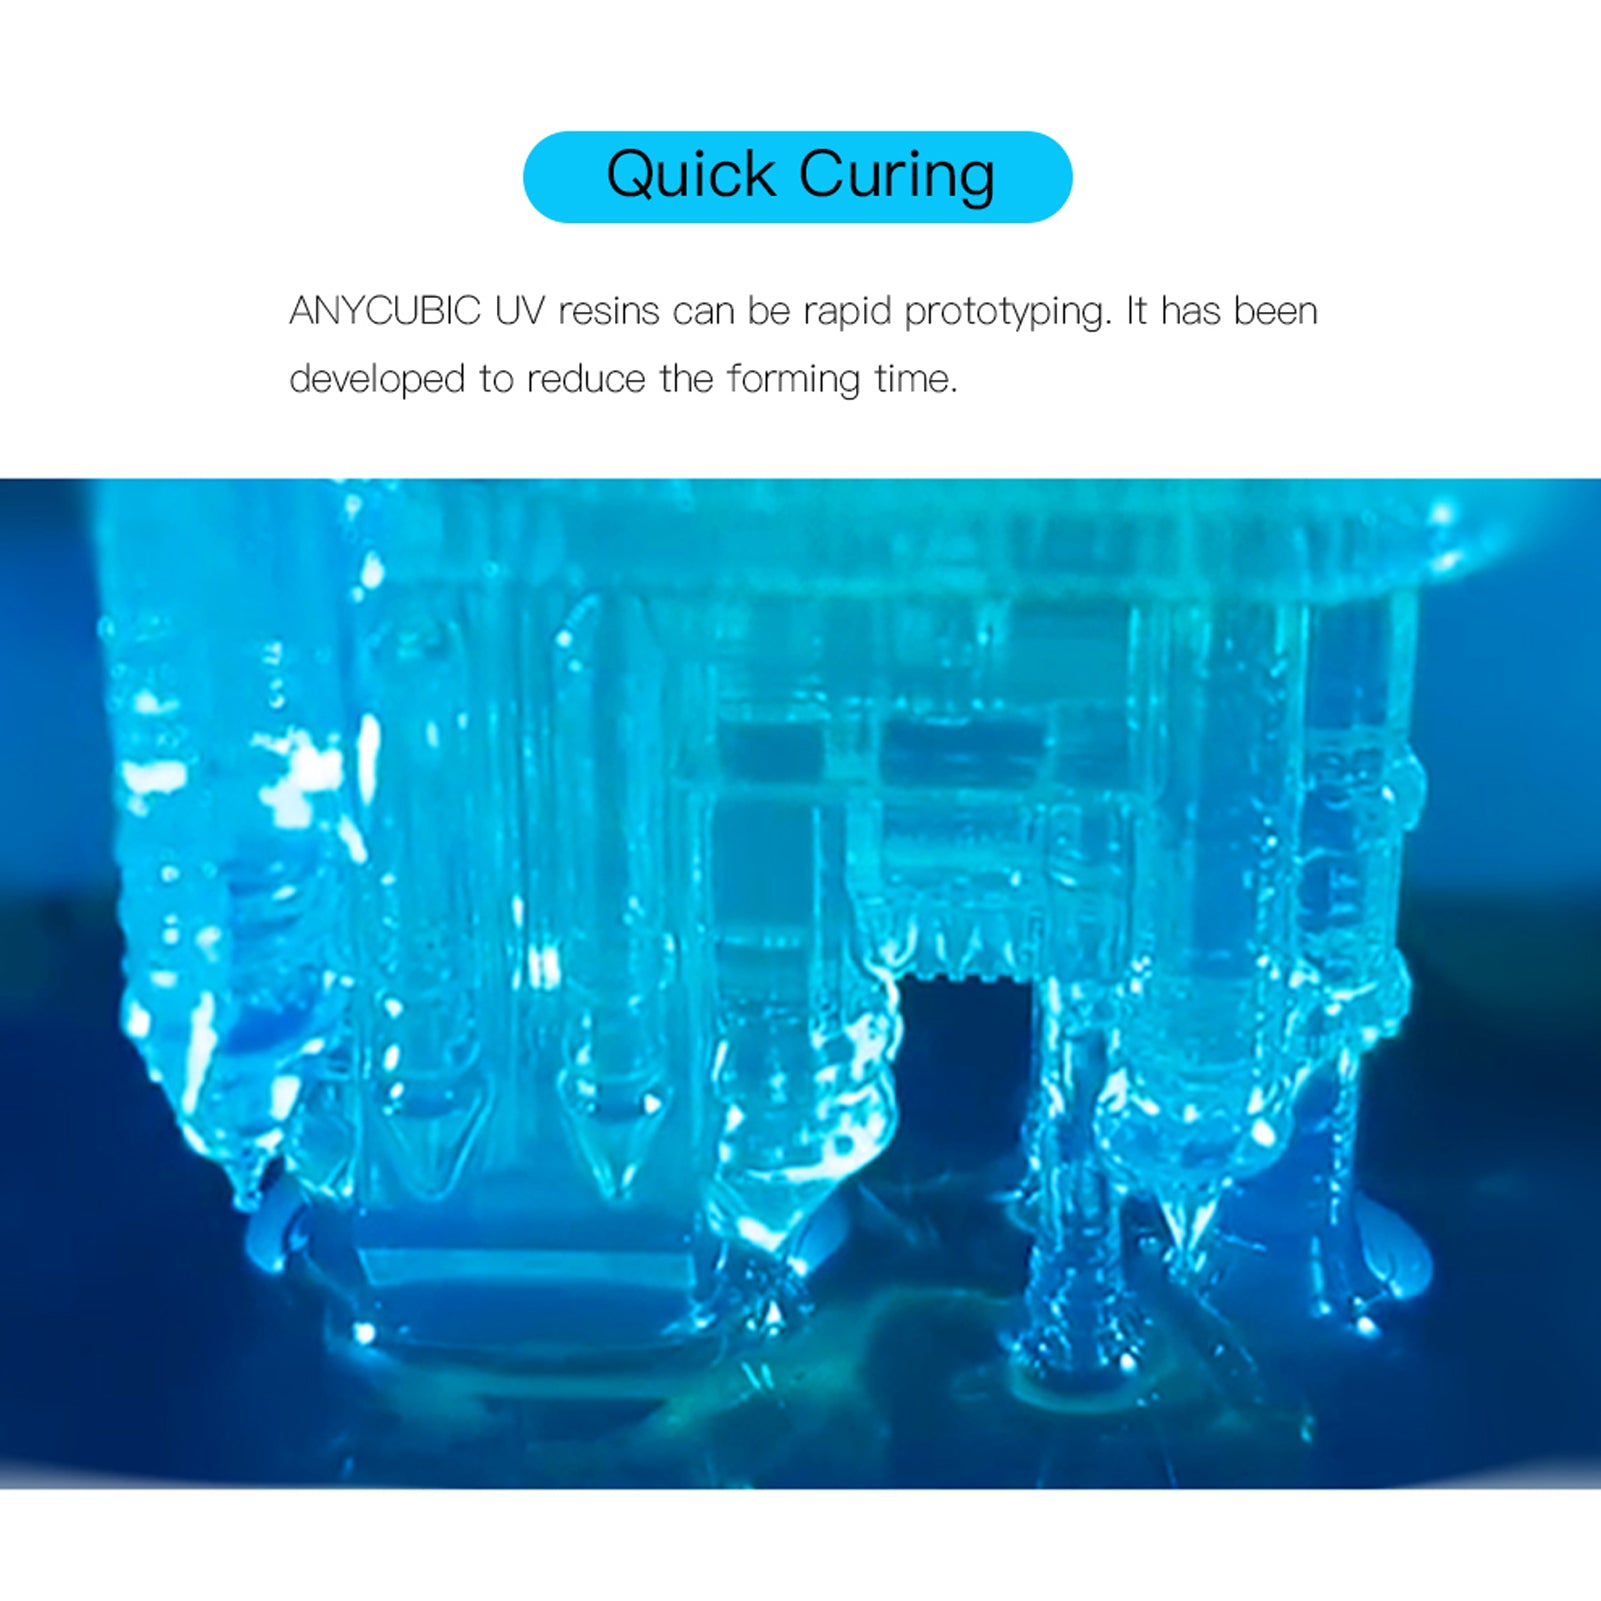 1kg ANYCUBIC 3D Printer Resin 405nm LCD Quick-Curing in transparent, white, green or grey color